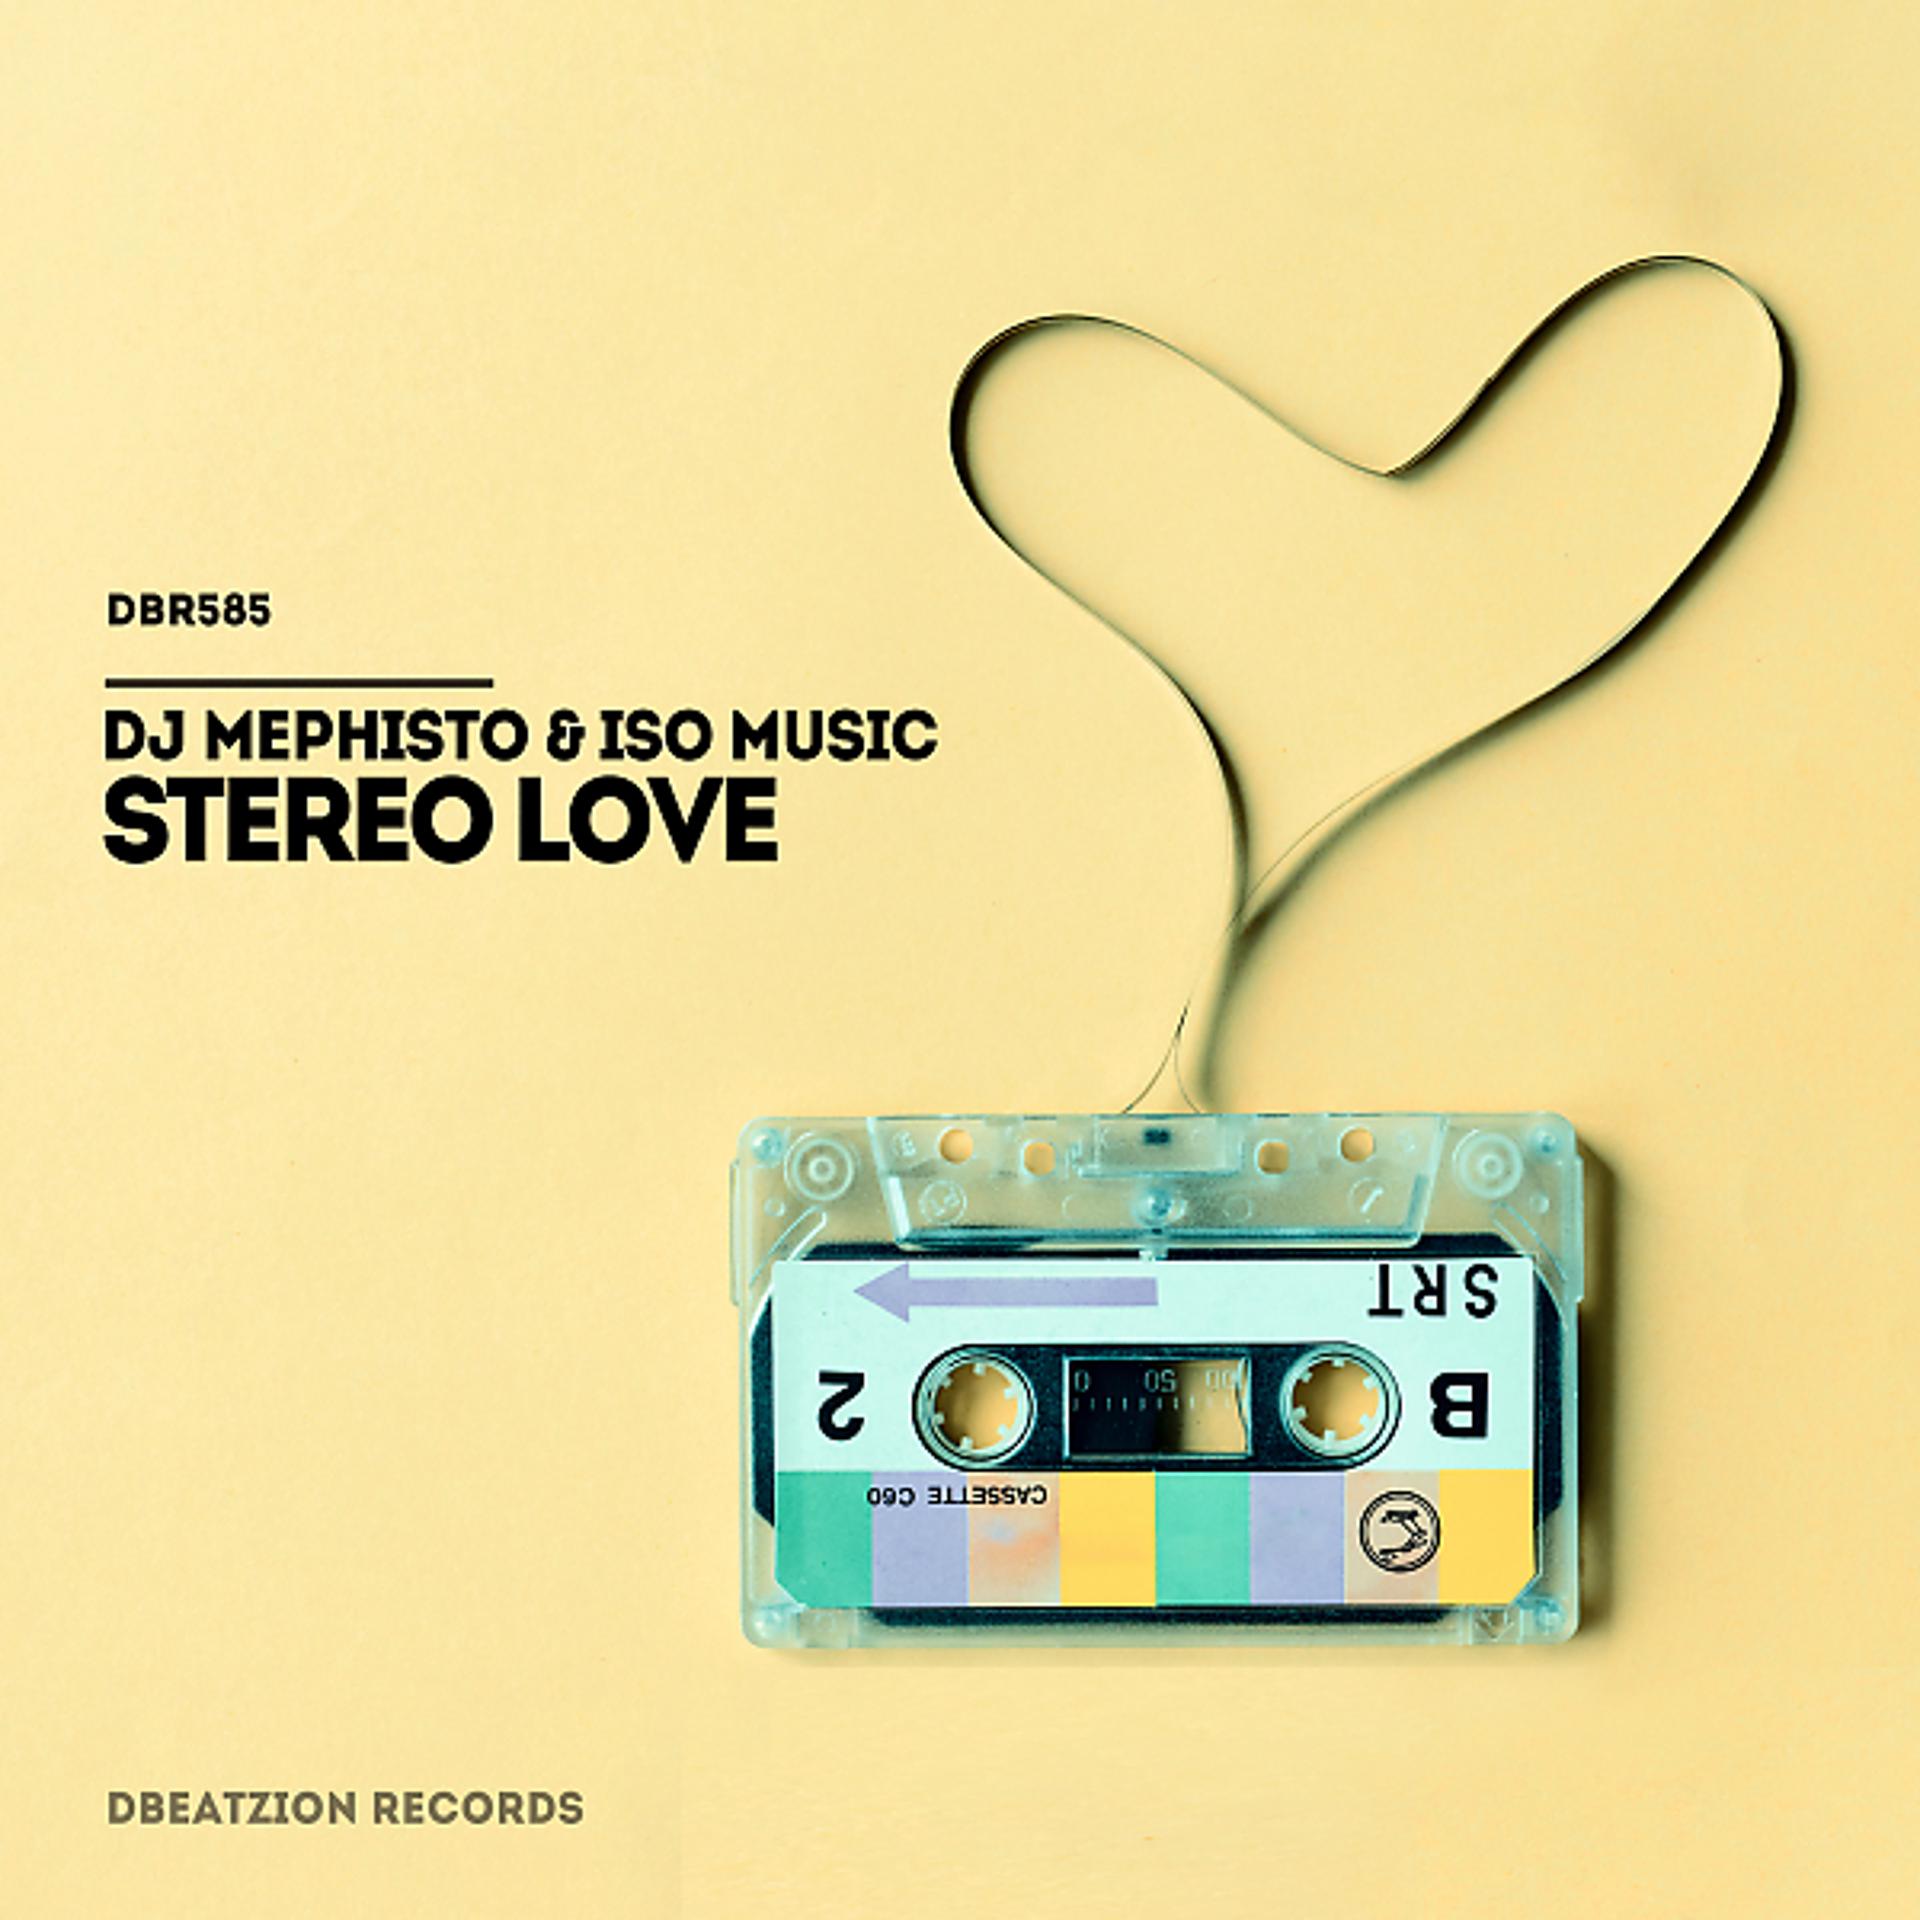 In and out of love remix. Стерео Мьюзик. Stereo Love. Stereo Love слушать mp3. Stereo Love DJ caba.